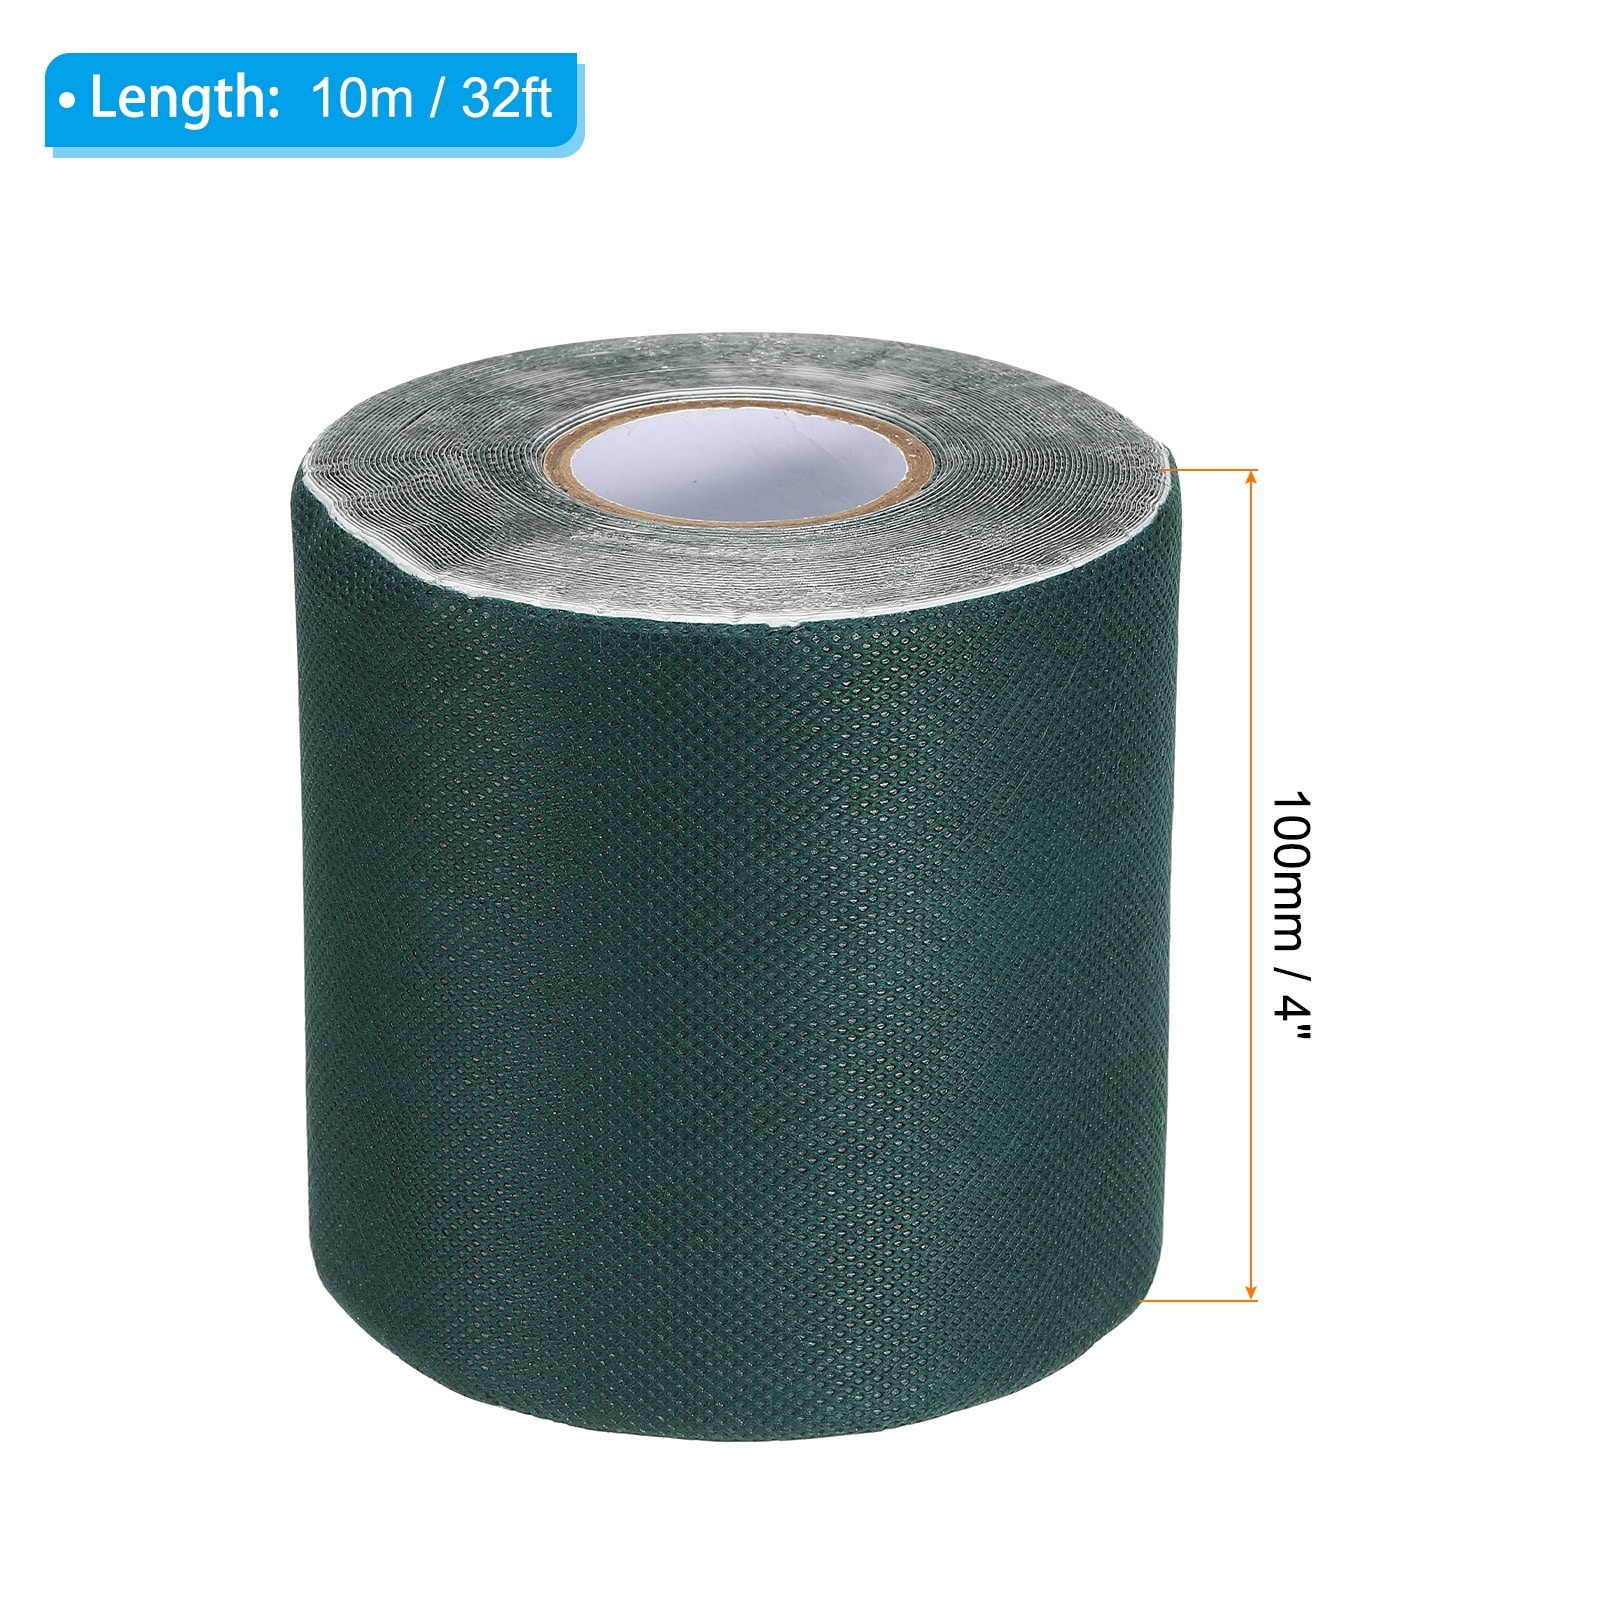 Turf Tape 4x32 ft, Self Adhesive Artificial Grass Seaming Tape, Green - 4x32